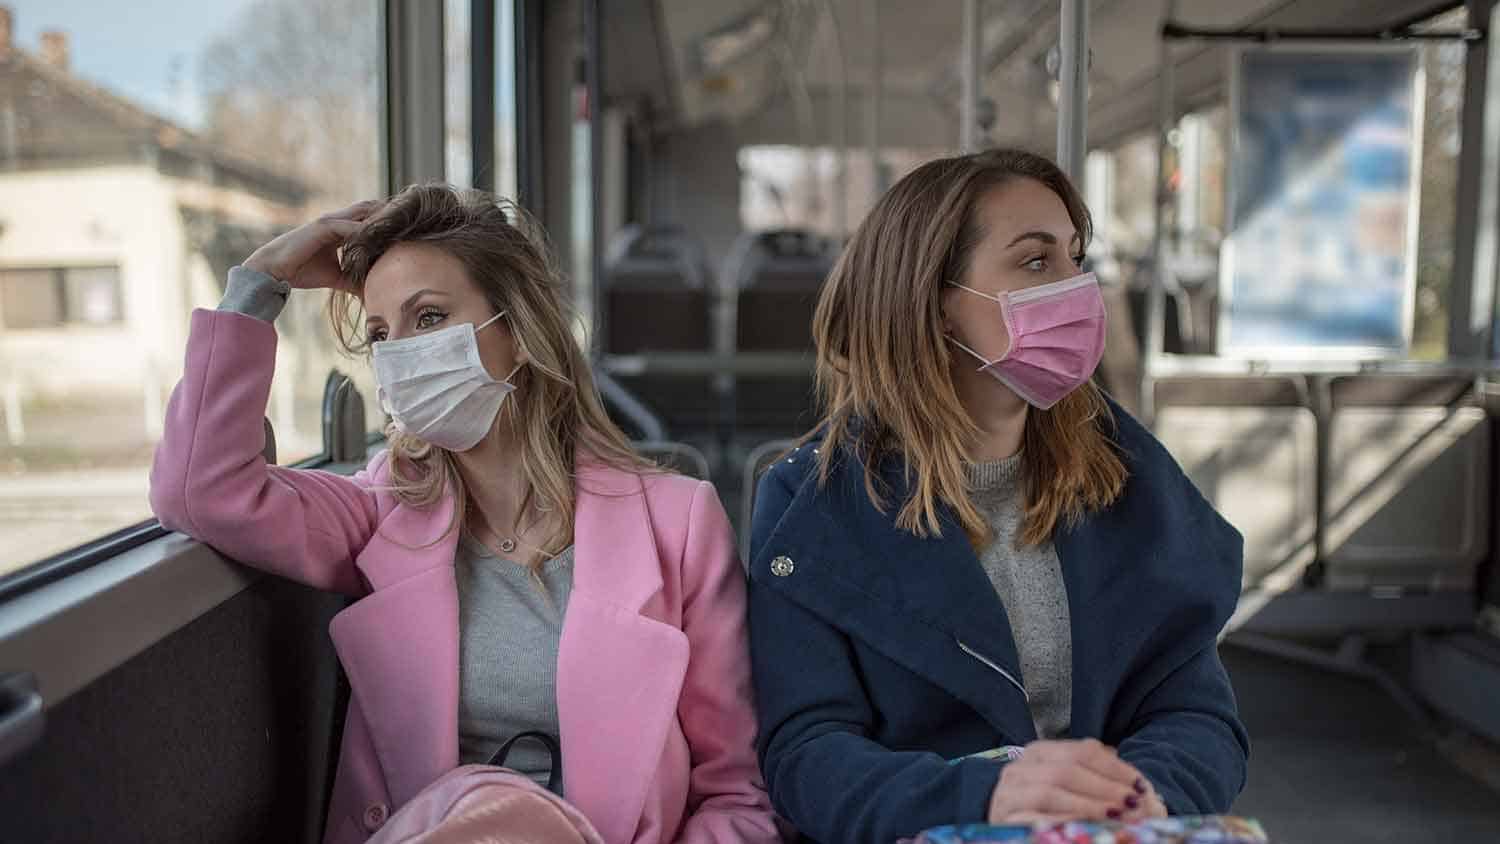 Two women sat on a bus, both wearing face masks looking different directions